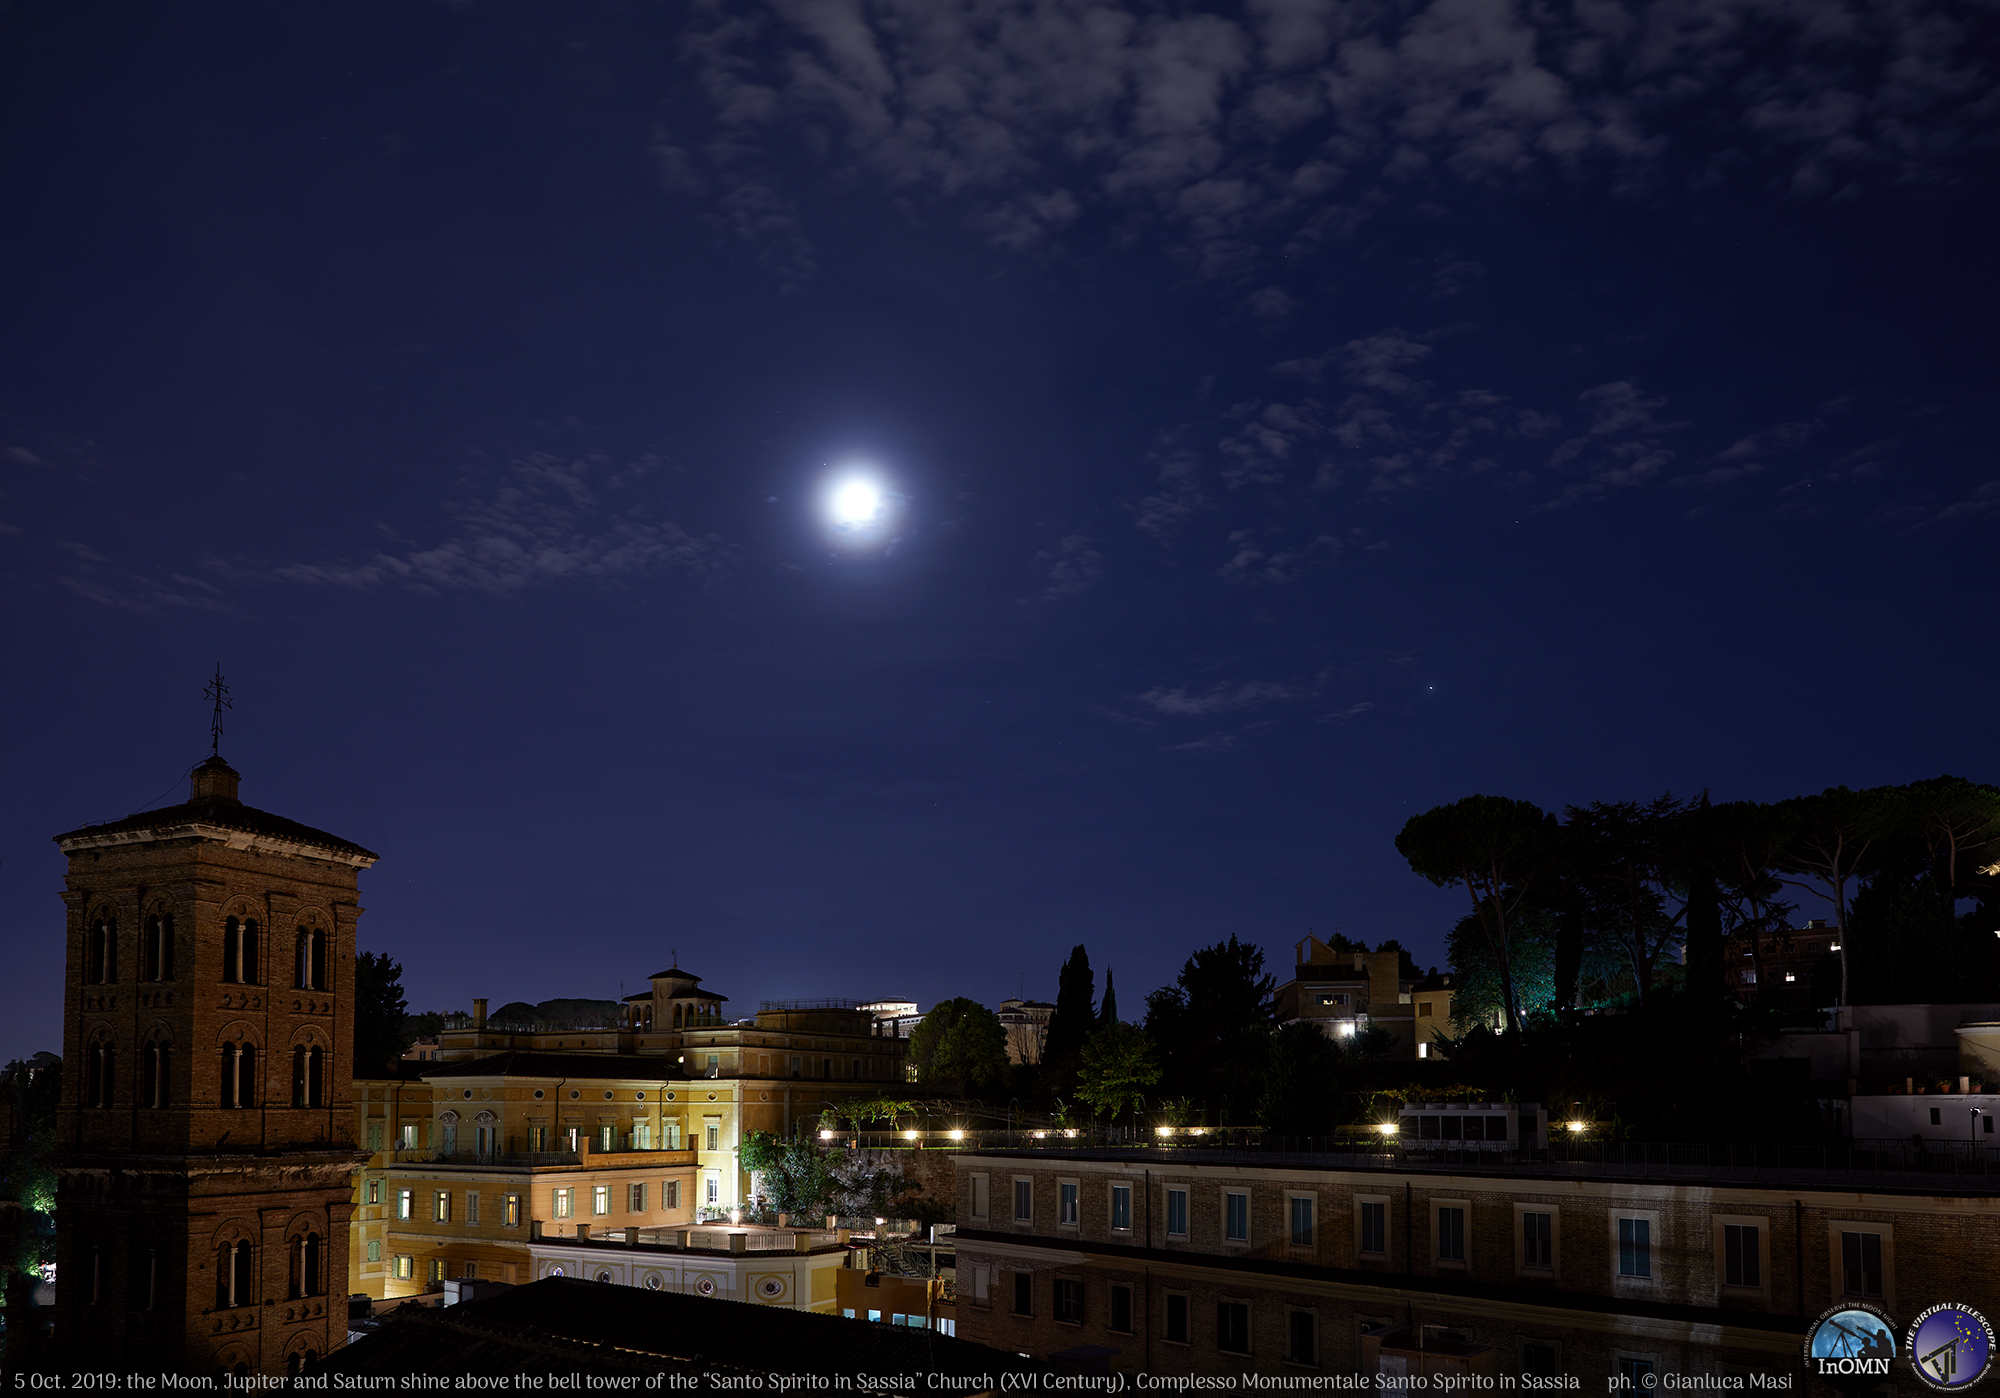 The Moon, Jupiter and Saturn (just upper left from the Moon) shone above the tower bell of the ancient "Complesso Monumentale di Santo Spirito in Sassia", Rome. - 5 Oct. 2019